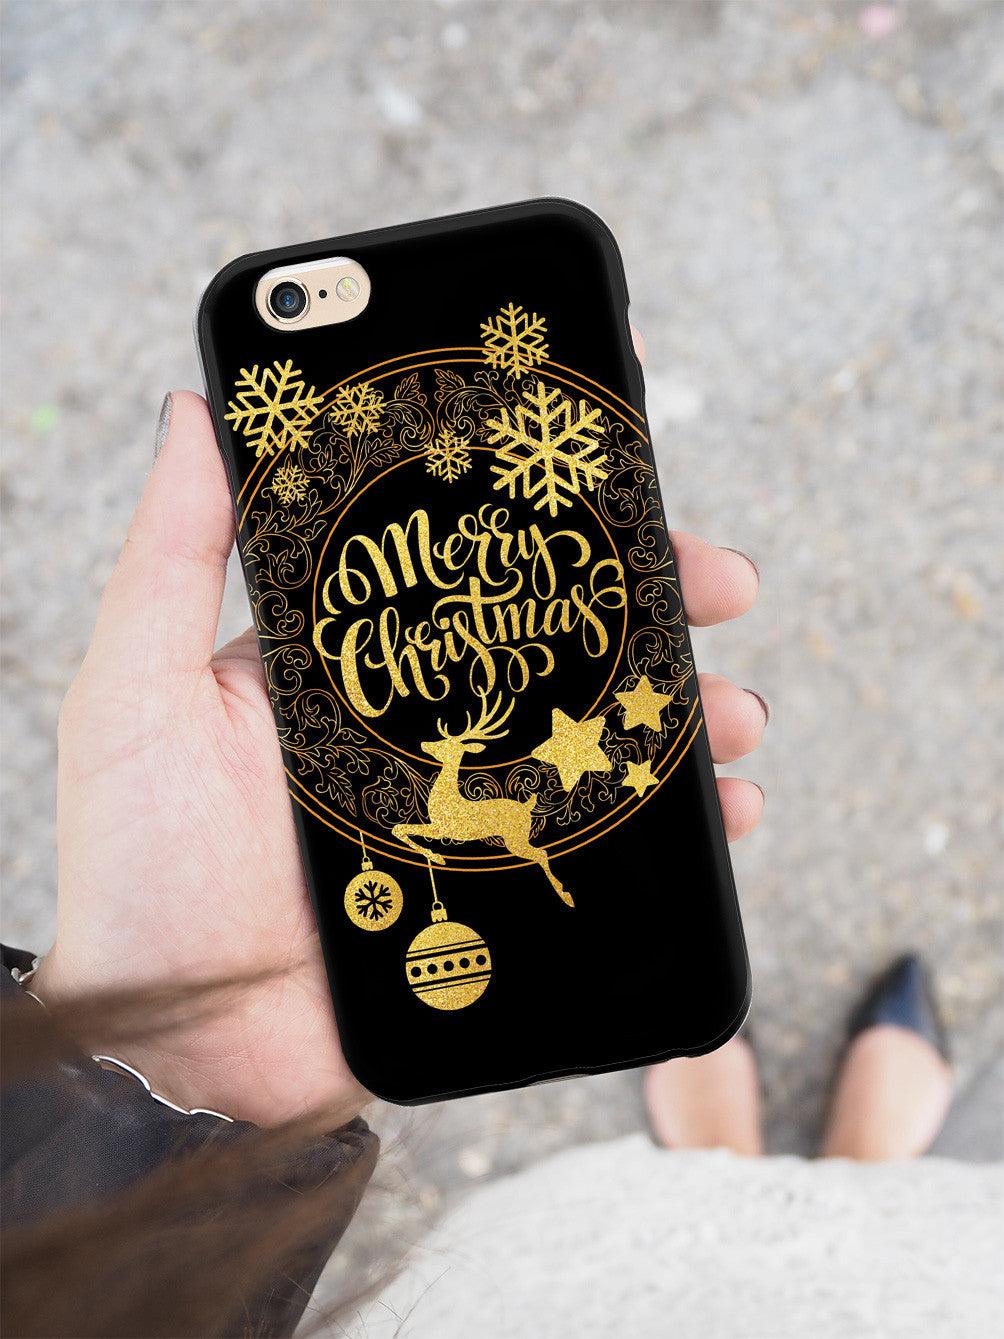 Gold - Merry Christmas Case